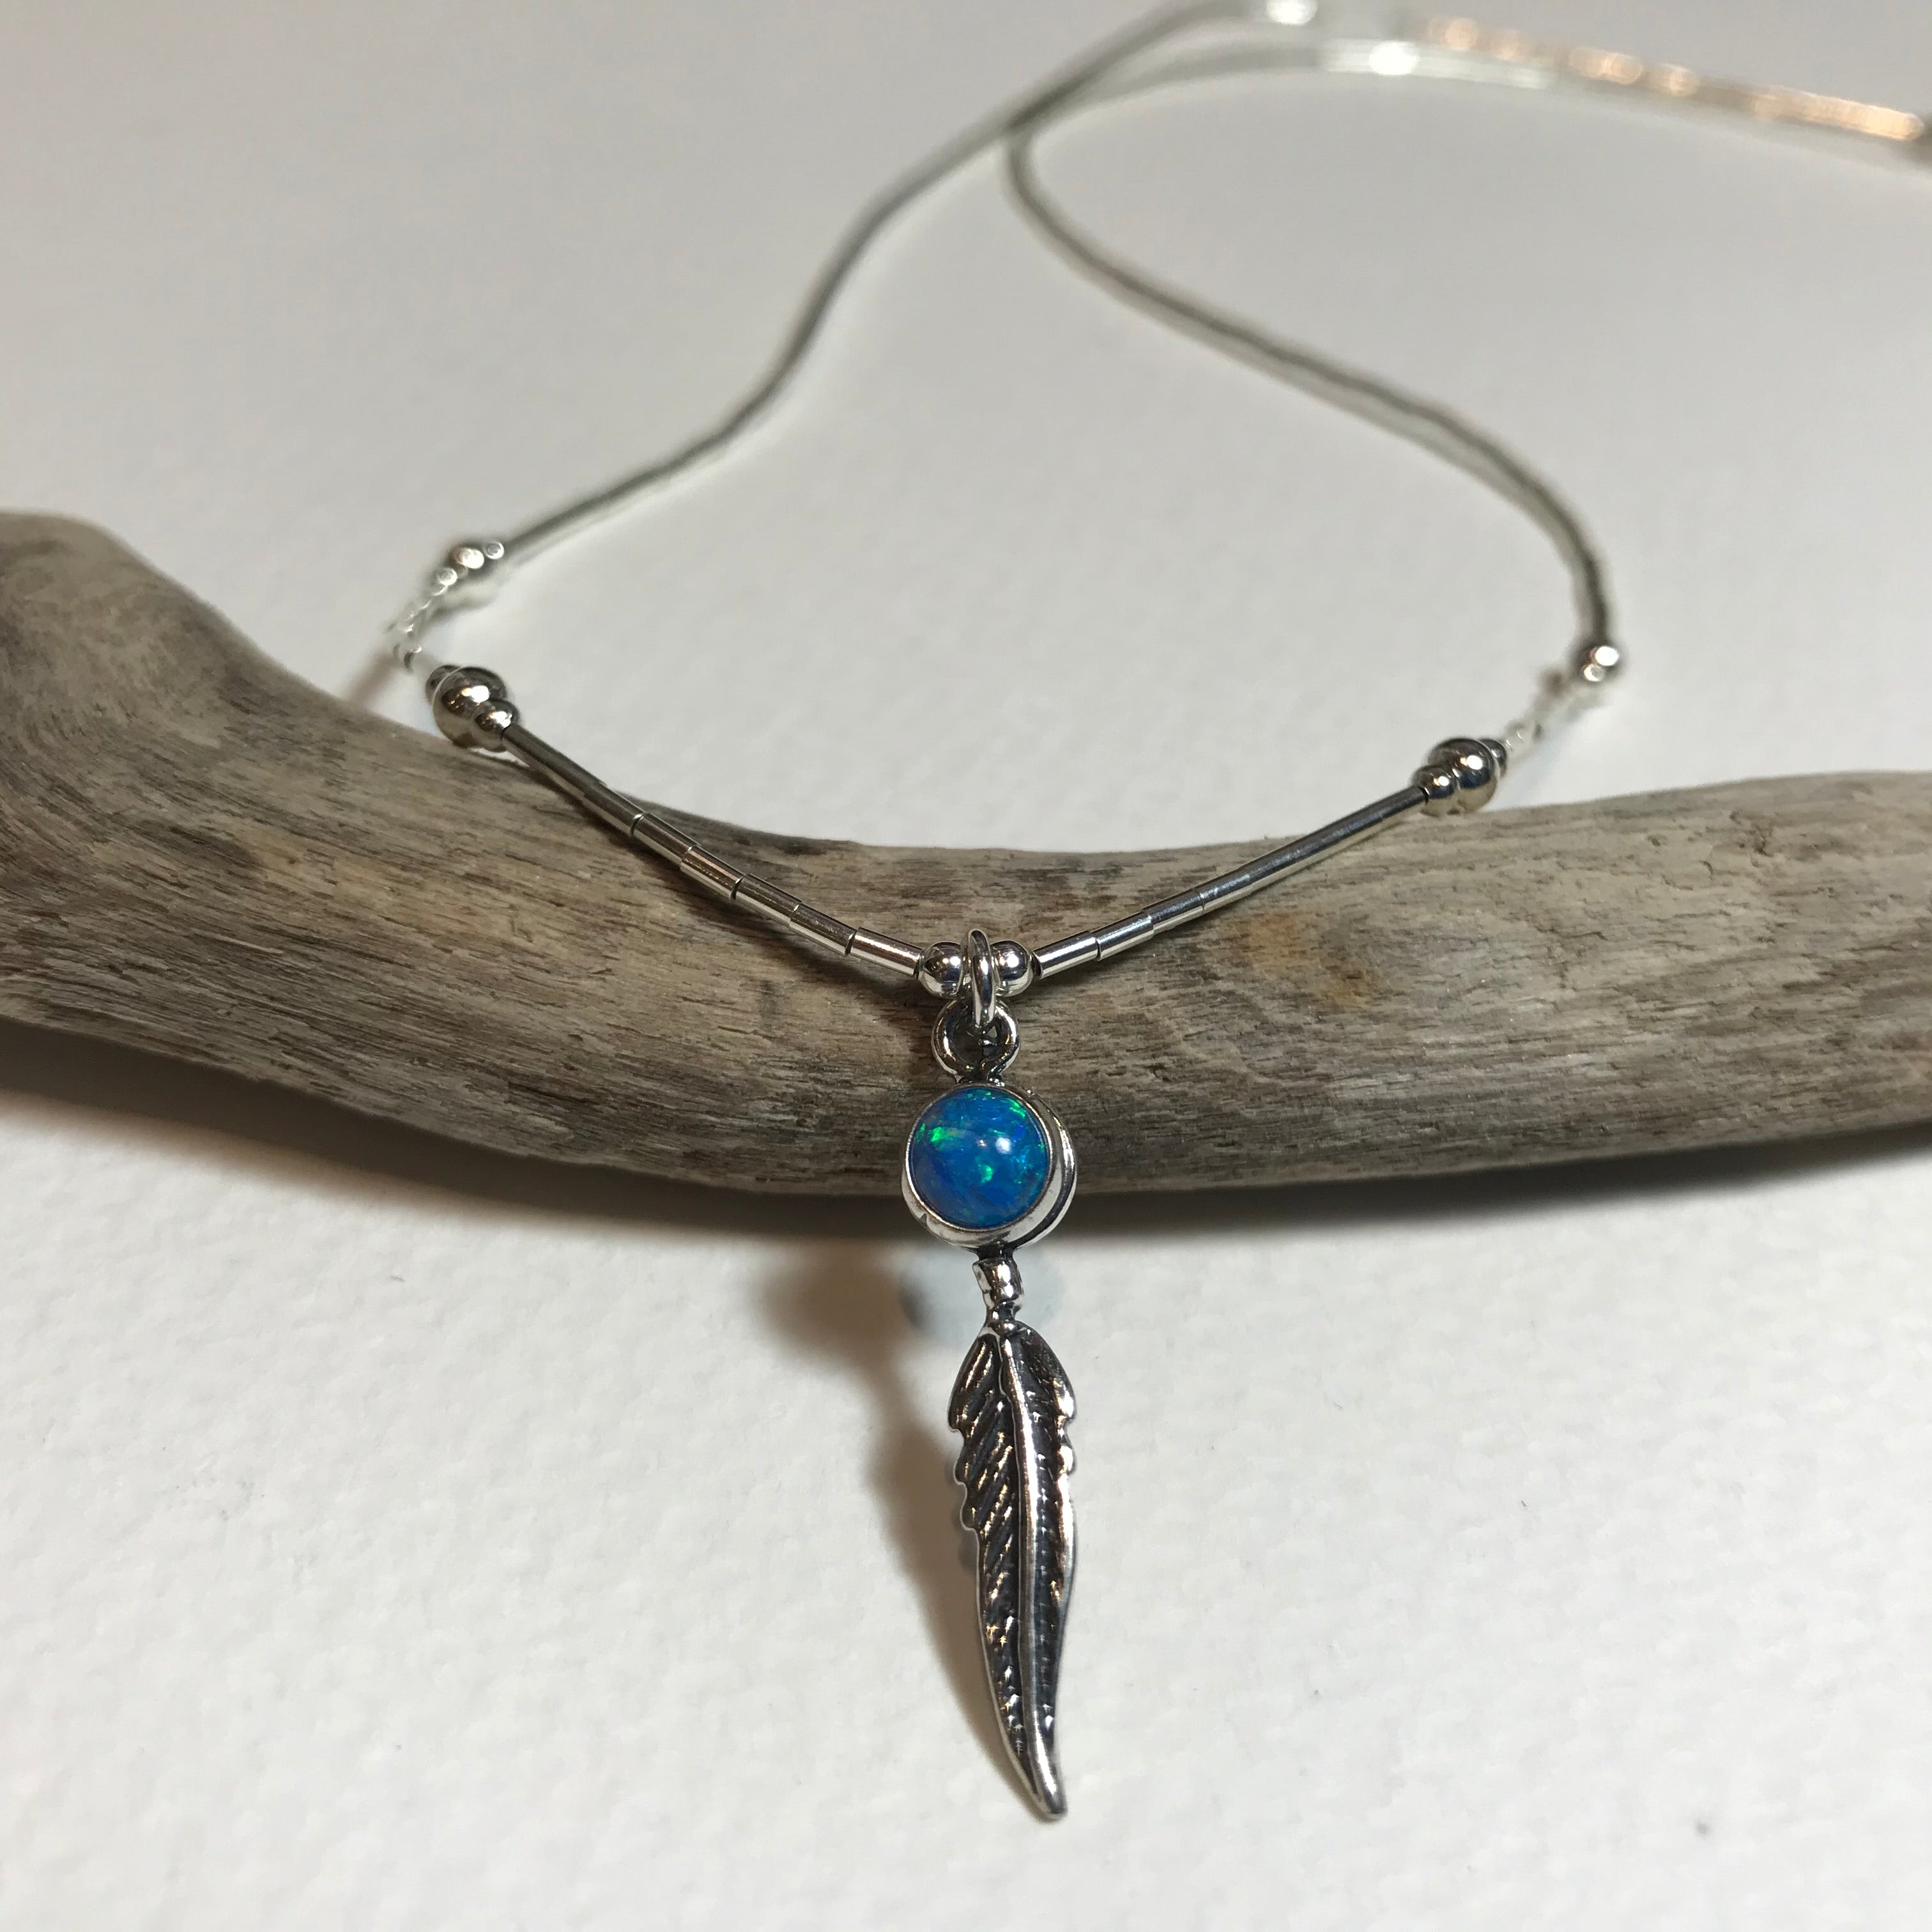 Opal Feather Necklace - The Nancy Smillie Shop - Art, Jewellery & Designer Gifts Glasgow